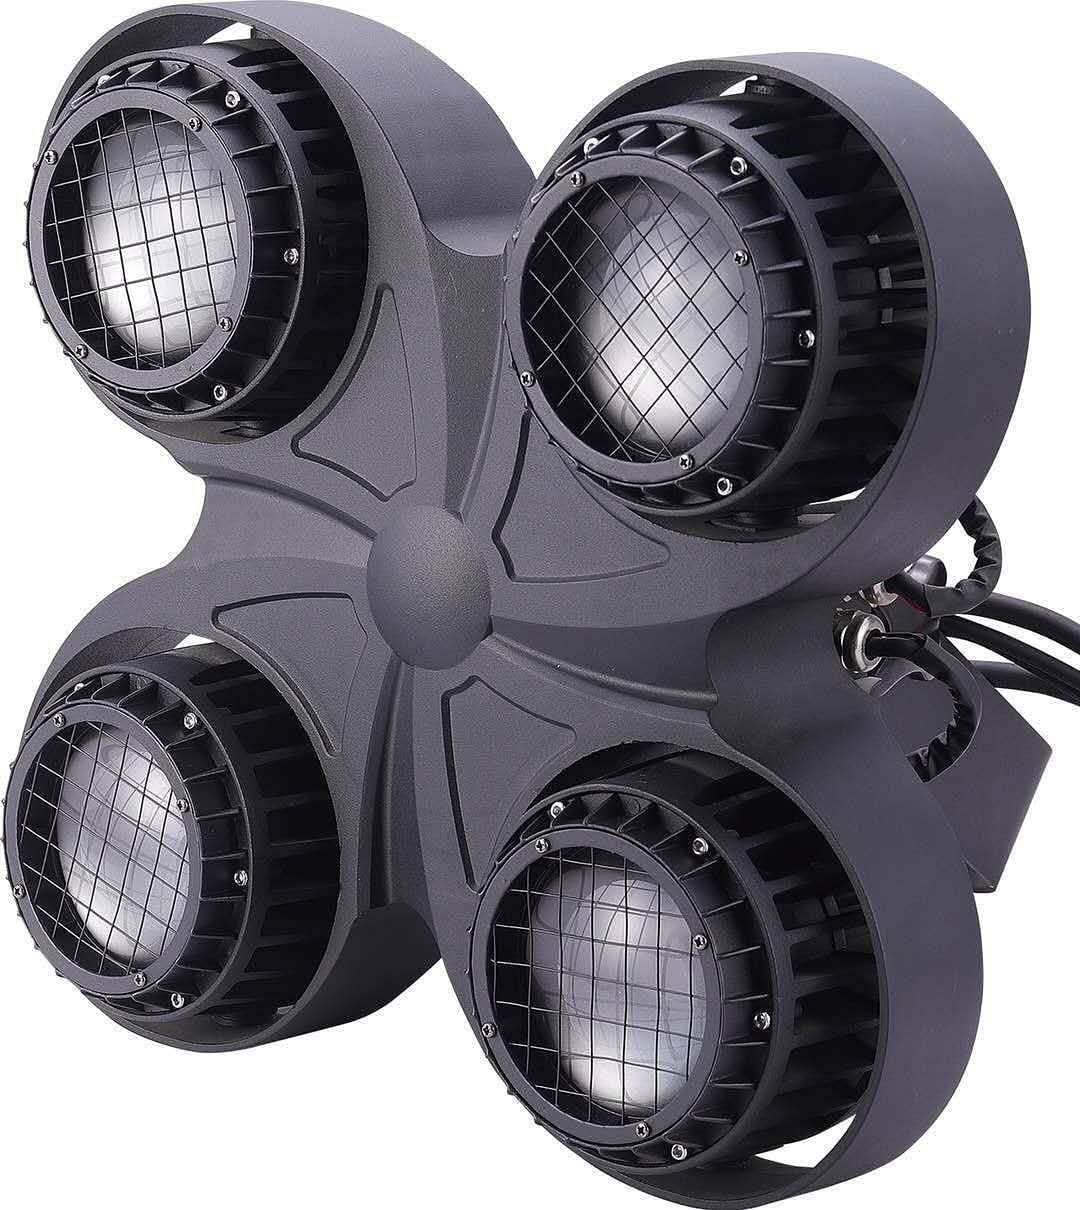 Outdoor 4 x 100W LED blinder audience light